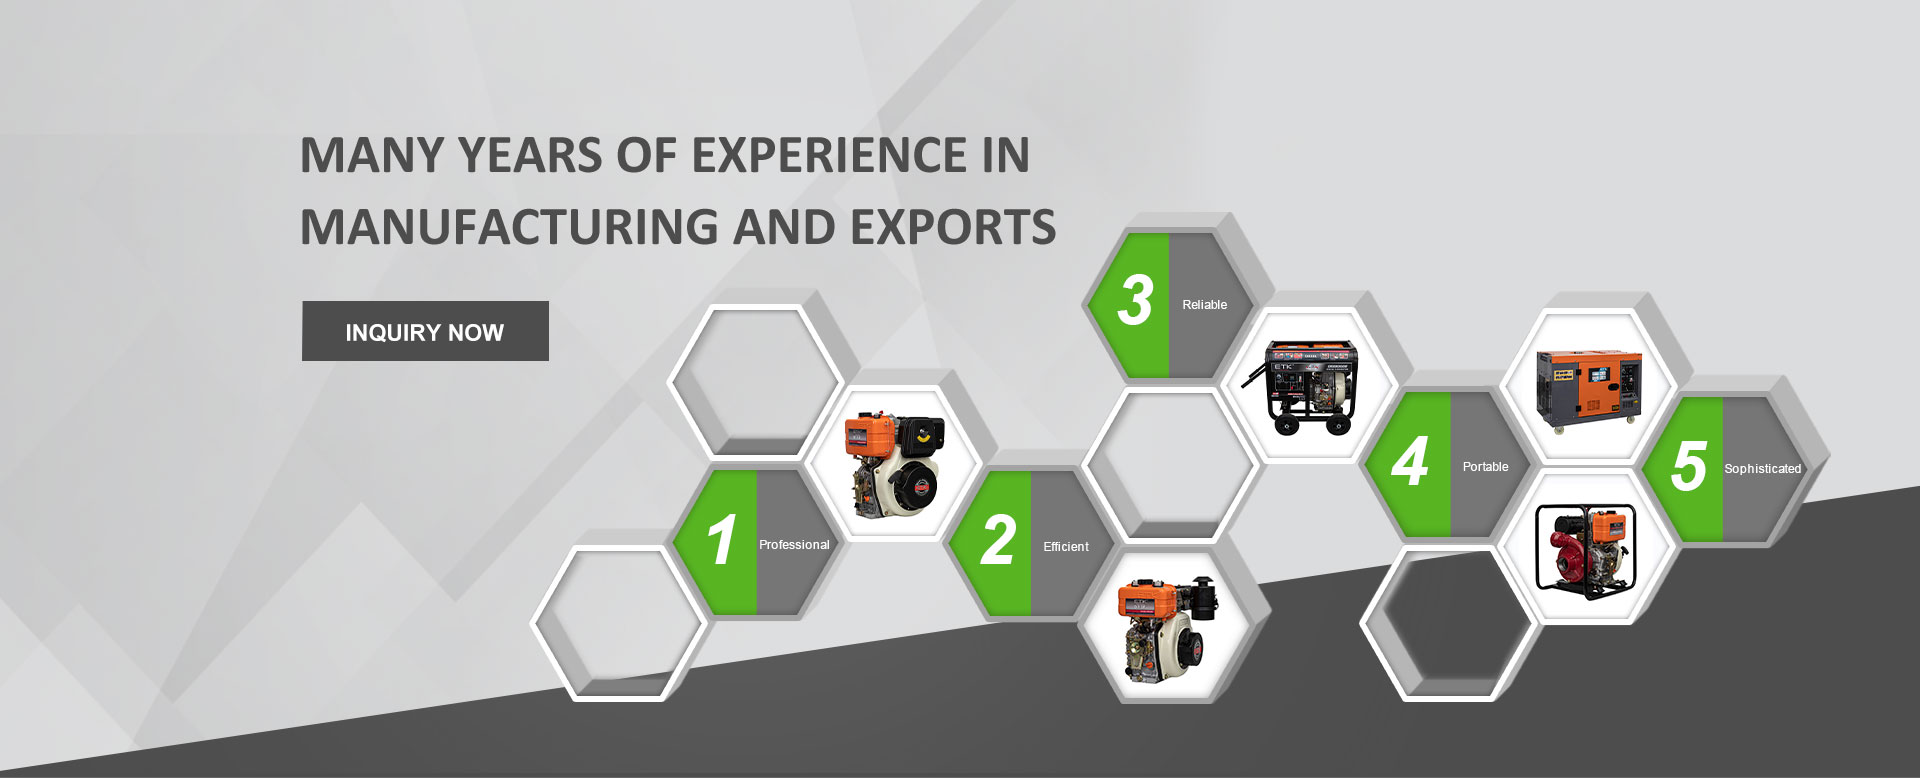 MANY YEARS OF EXPERIENCE IN MANUFACTURING AND EXPORTS